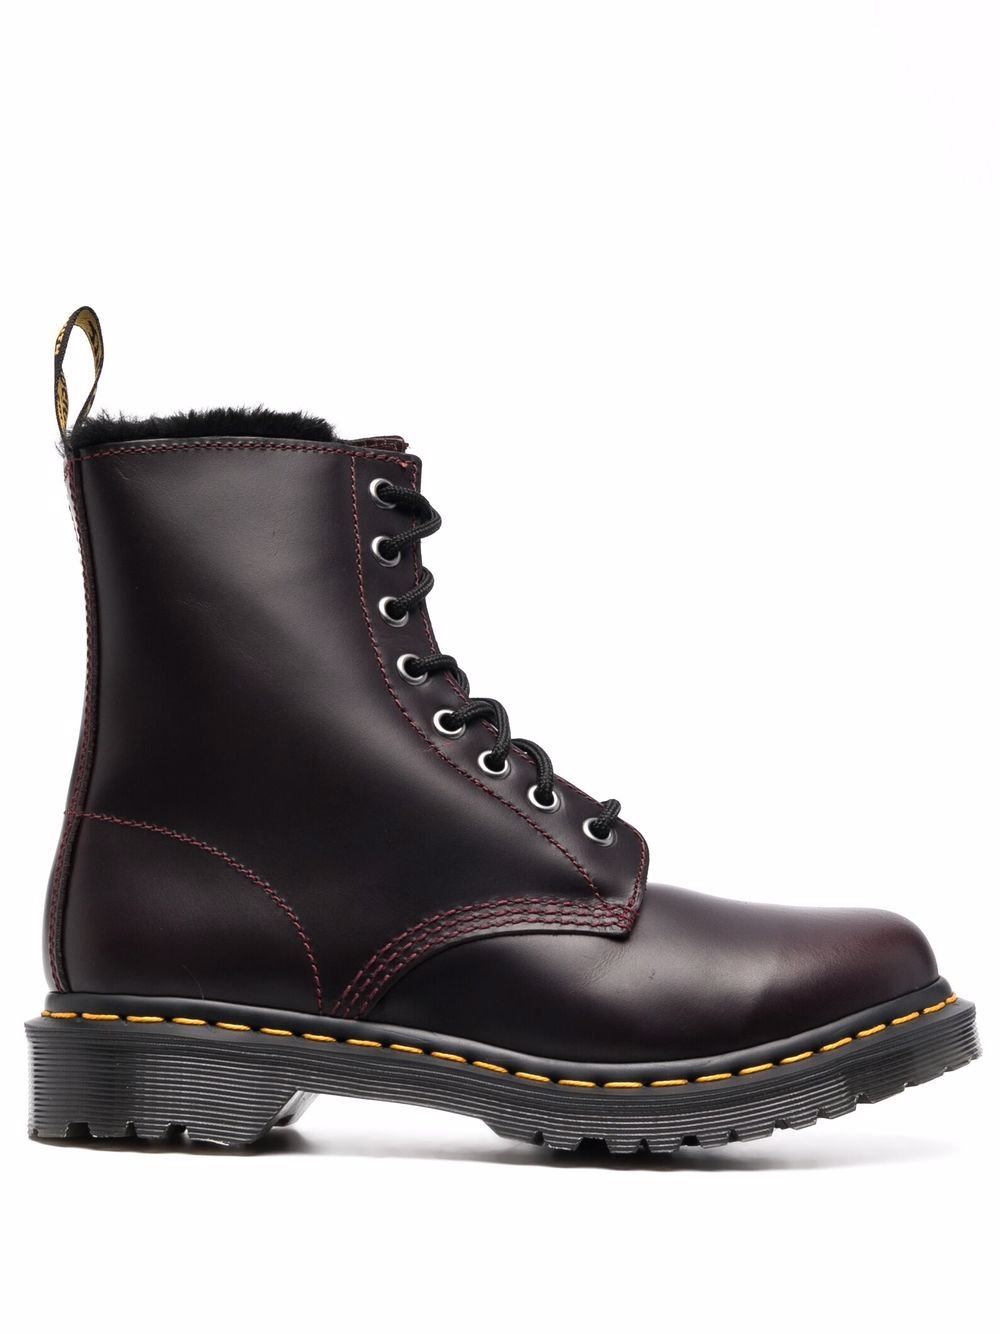 Image 1 of Dr. Martens Serena 1460 leather boots